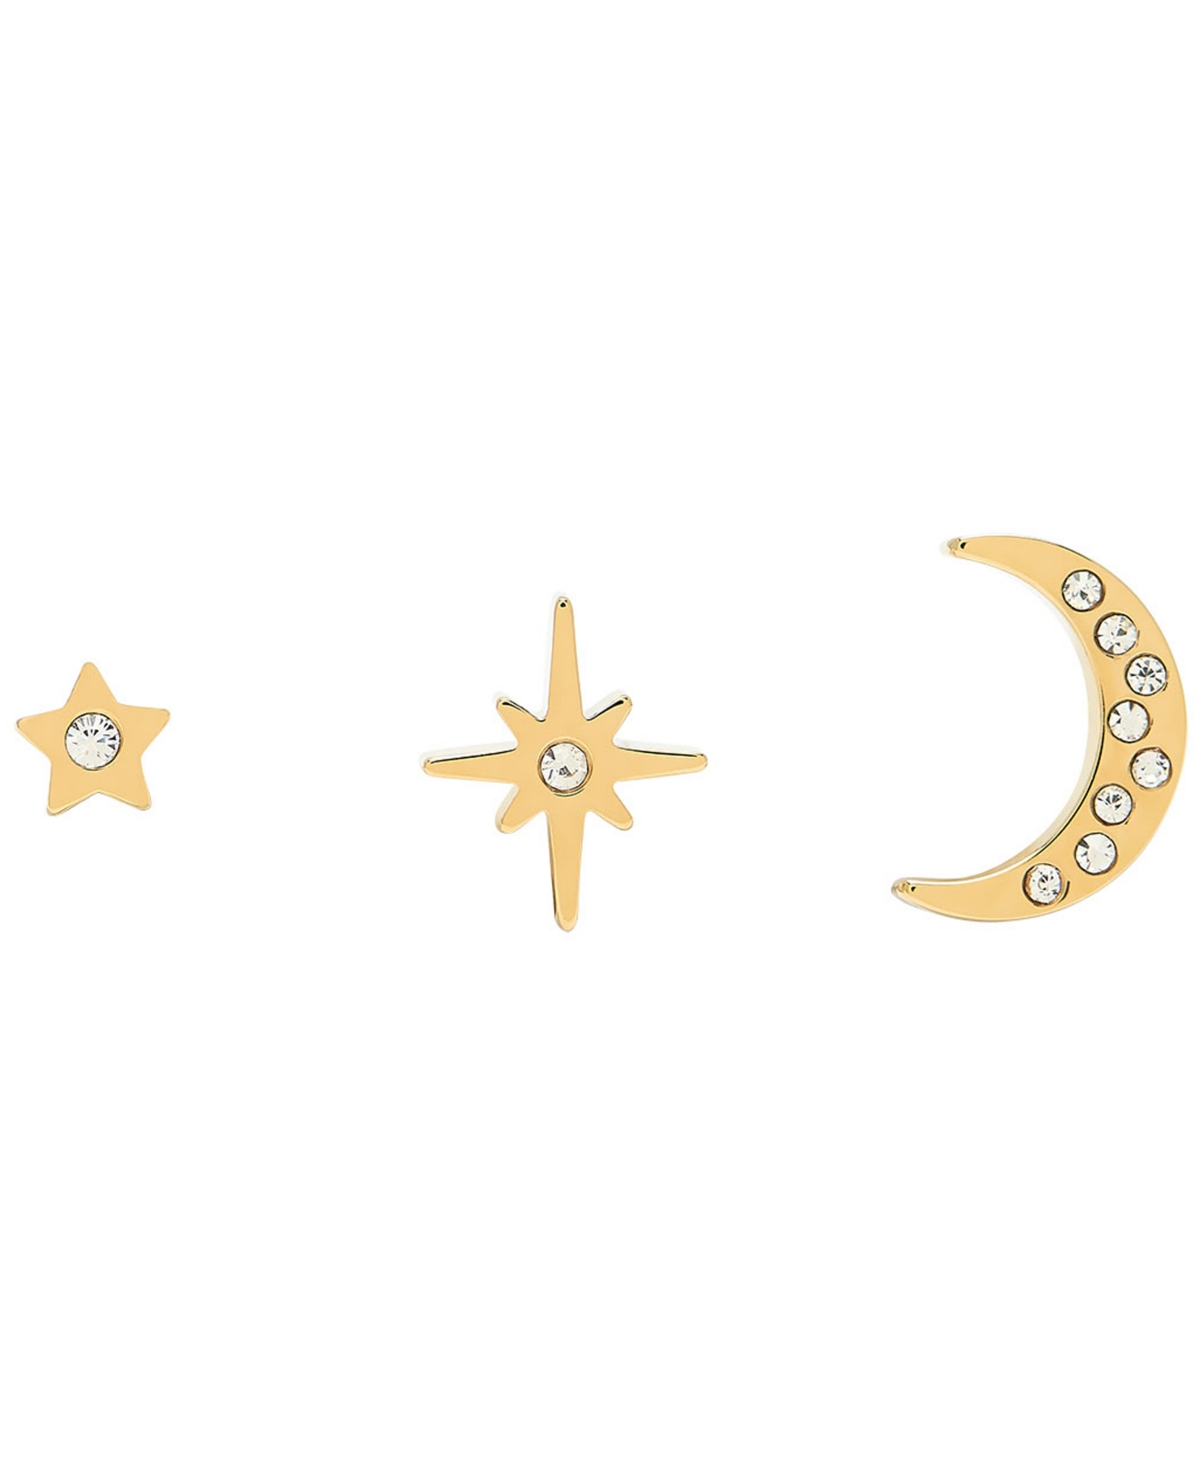 Olivia Burton Celestial North Star Moon 18k Gold-plated Studs Earring Set In Gold-tone